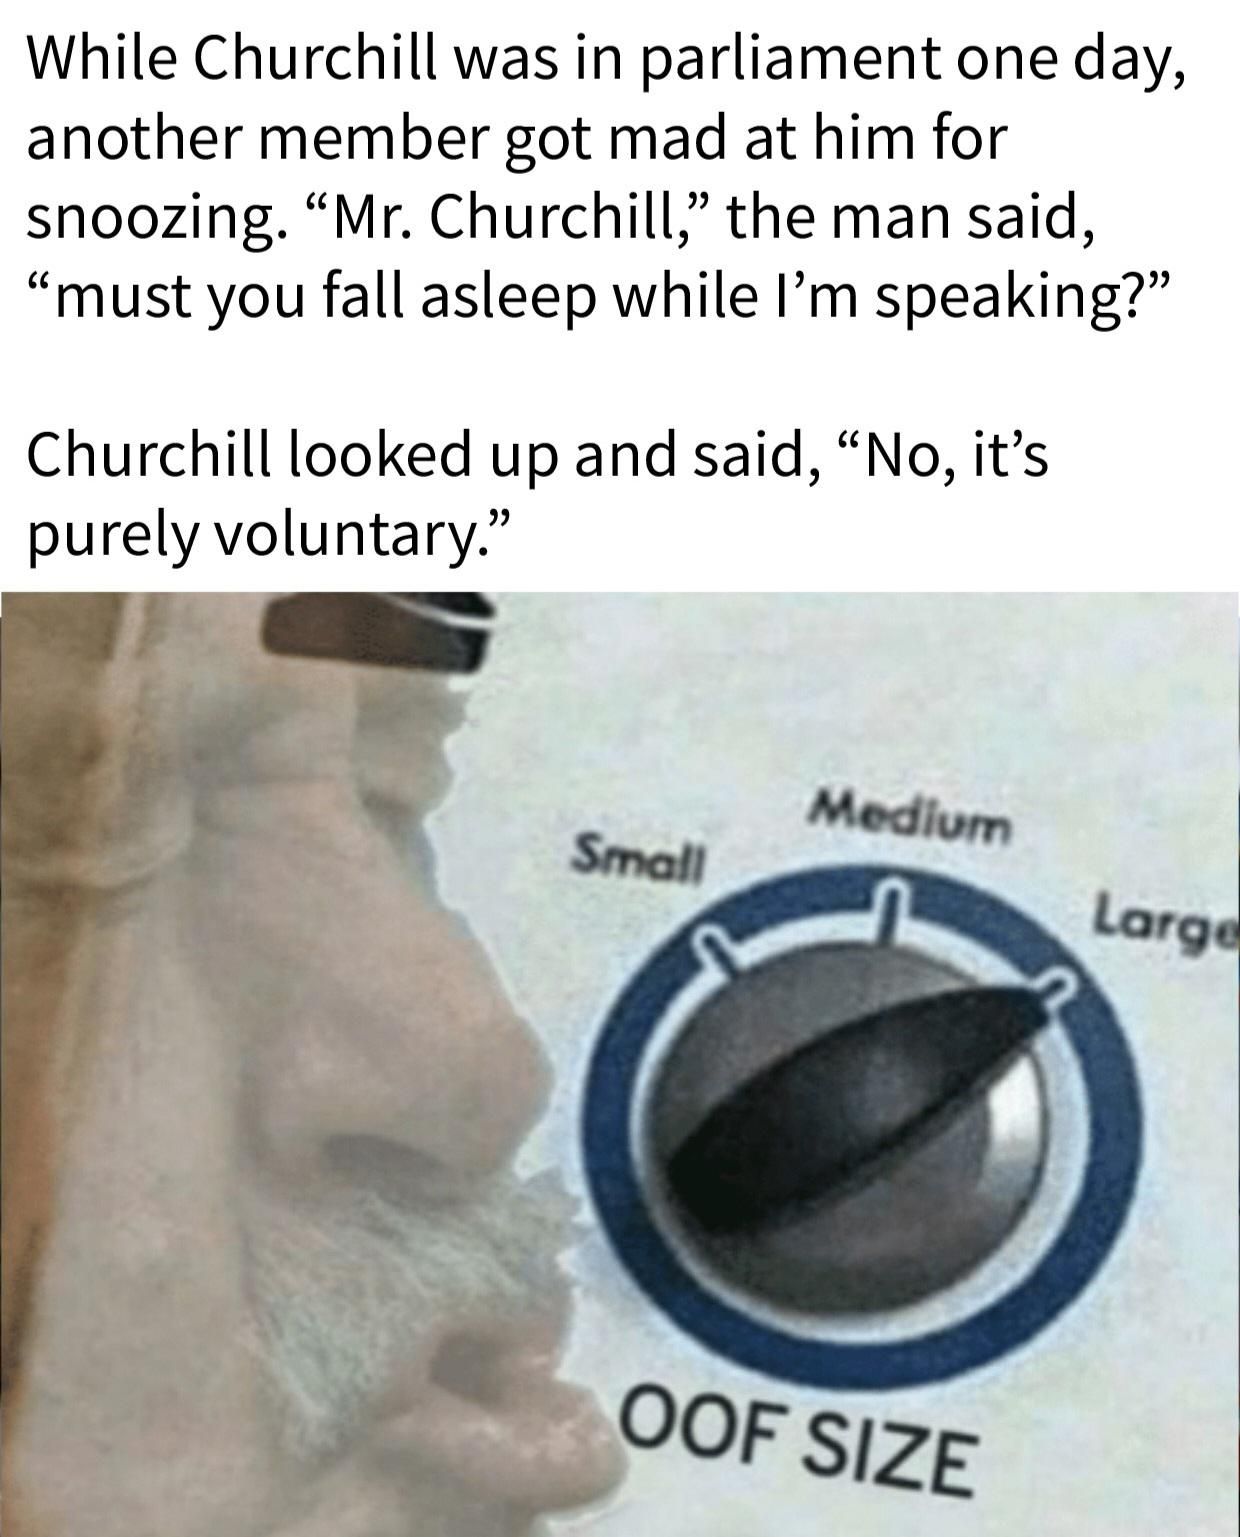 So many people got rekt by Churchill, and I'm not talking about Gallipoli.